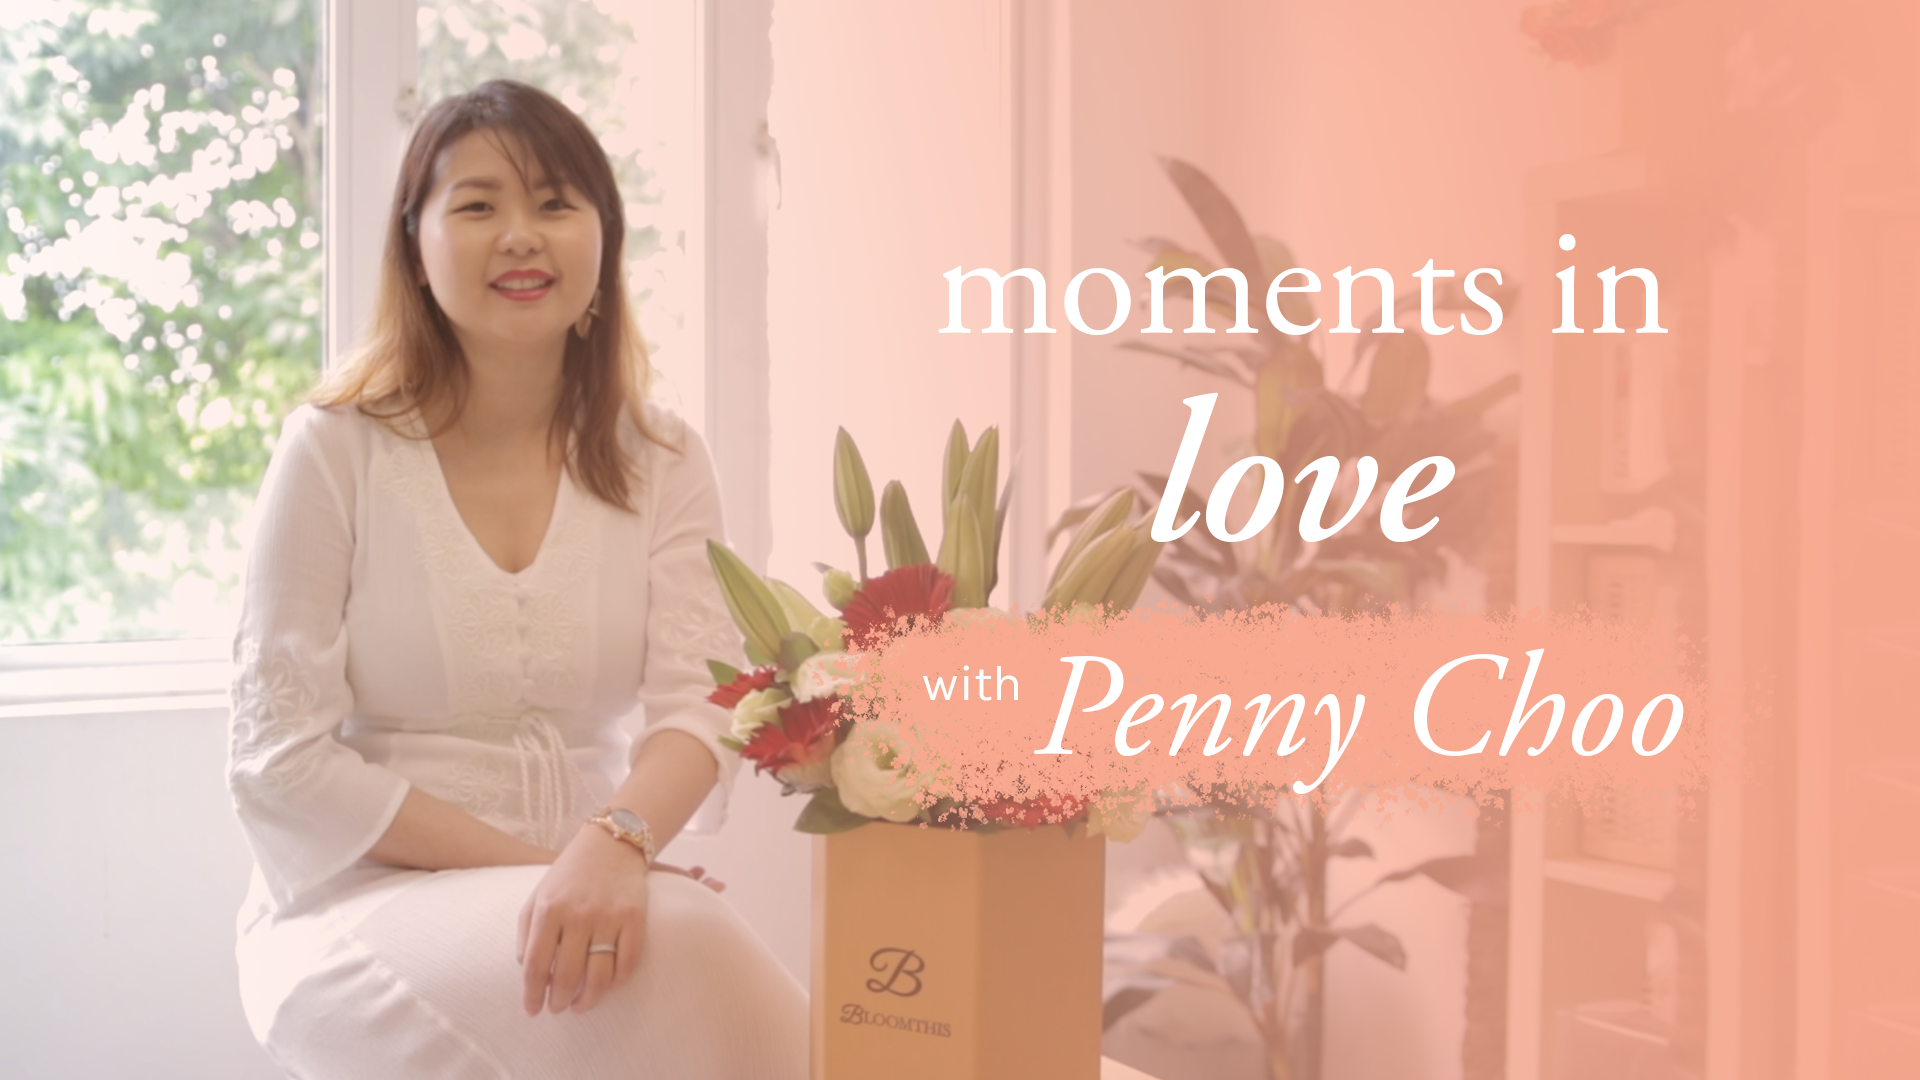 Moments in Love with Penny Choo